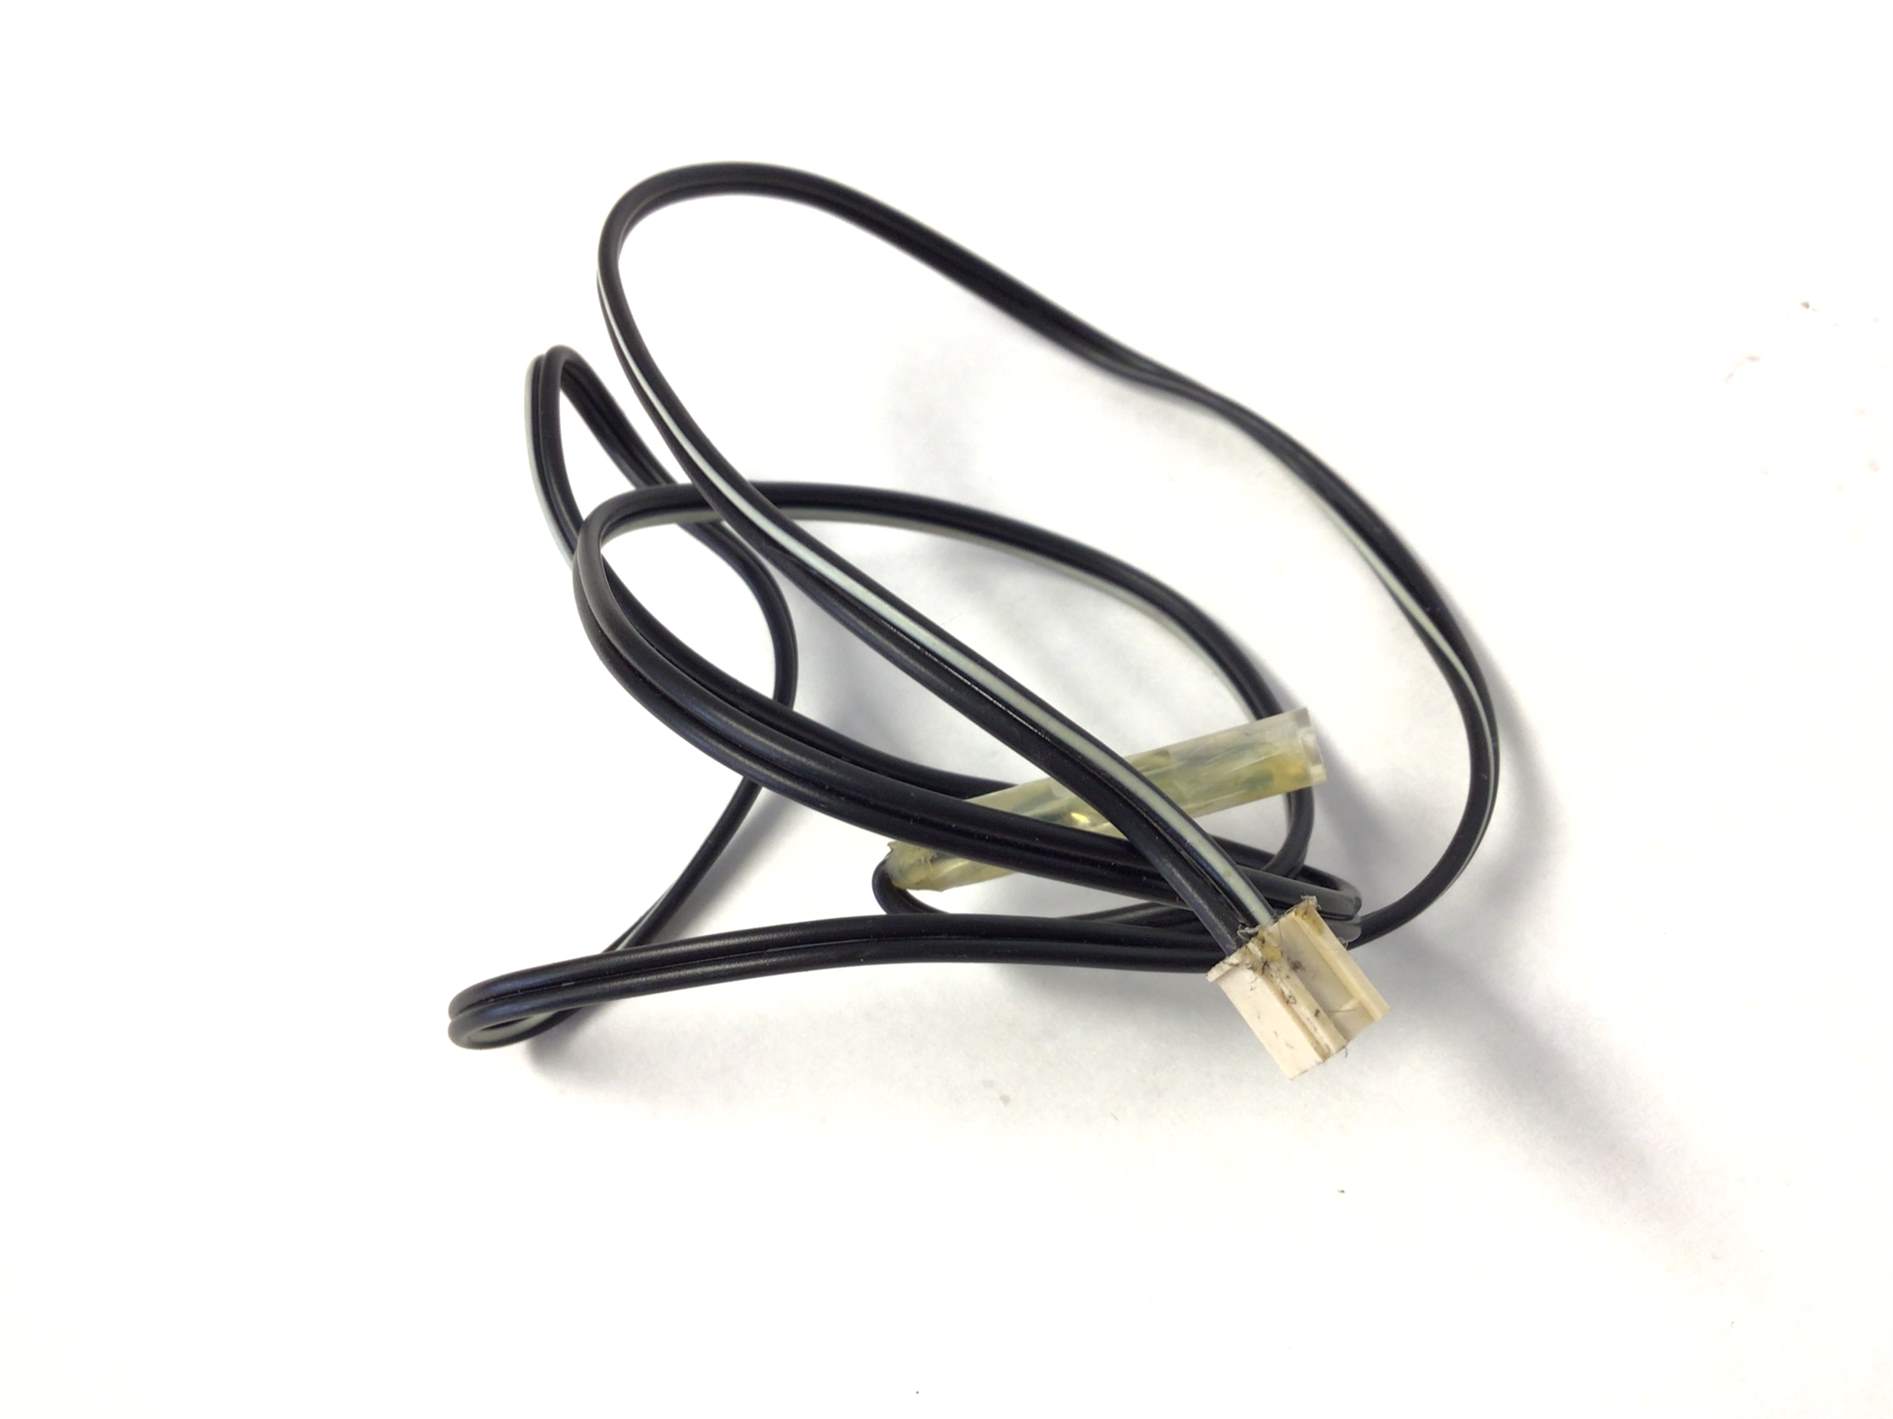 Speed Sensor Wire Extension (Used)